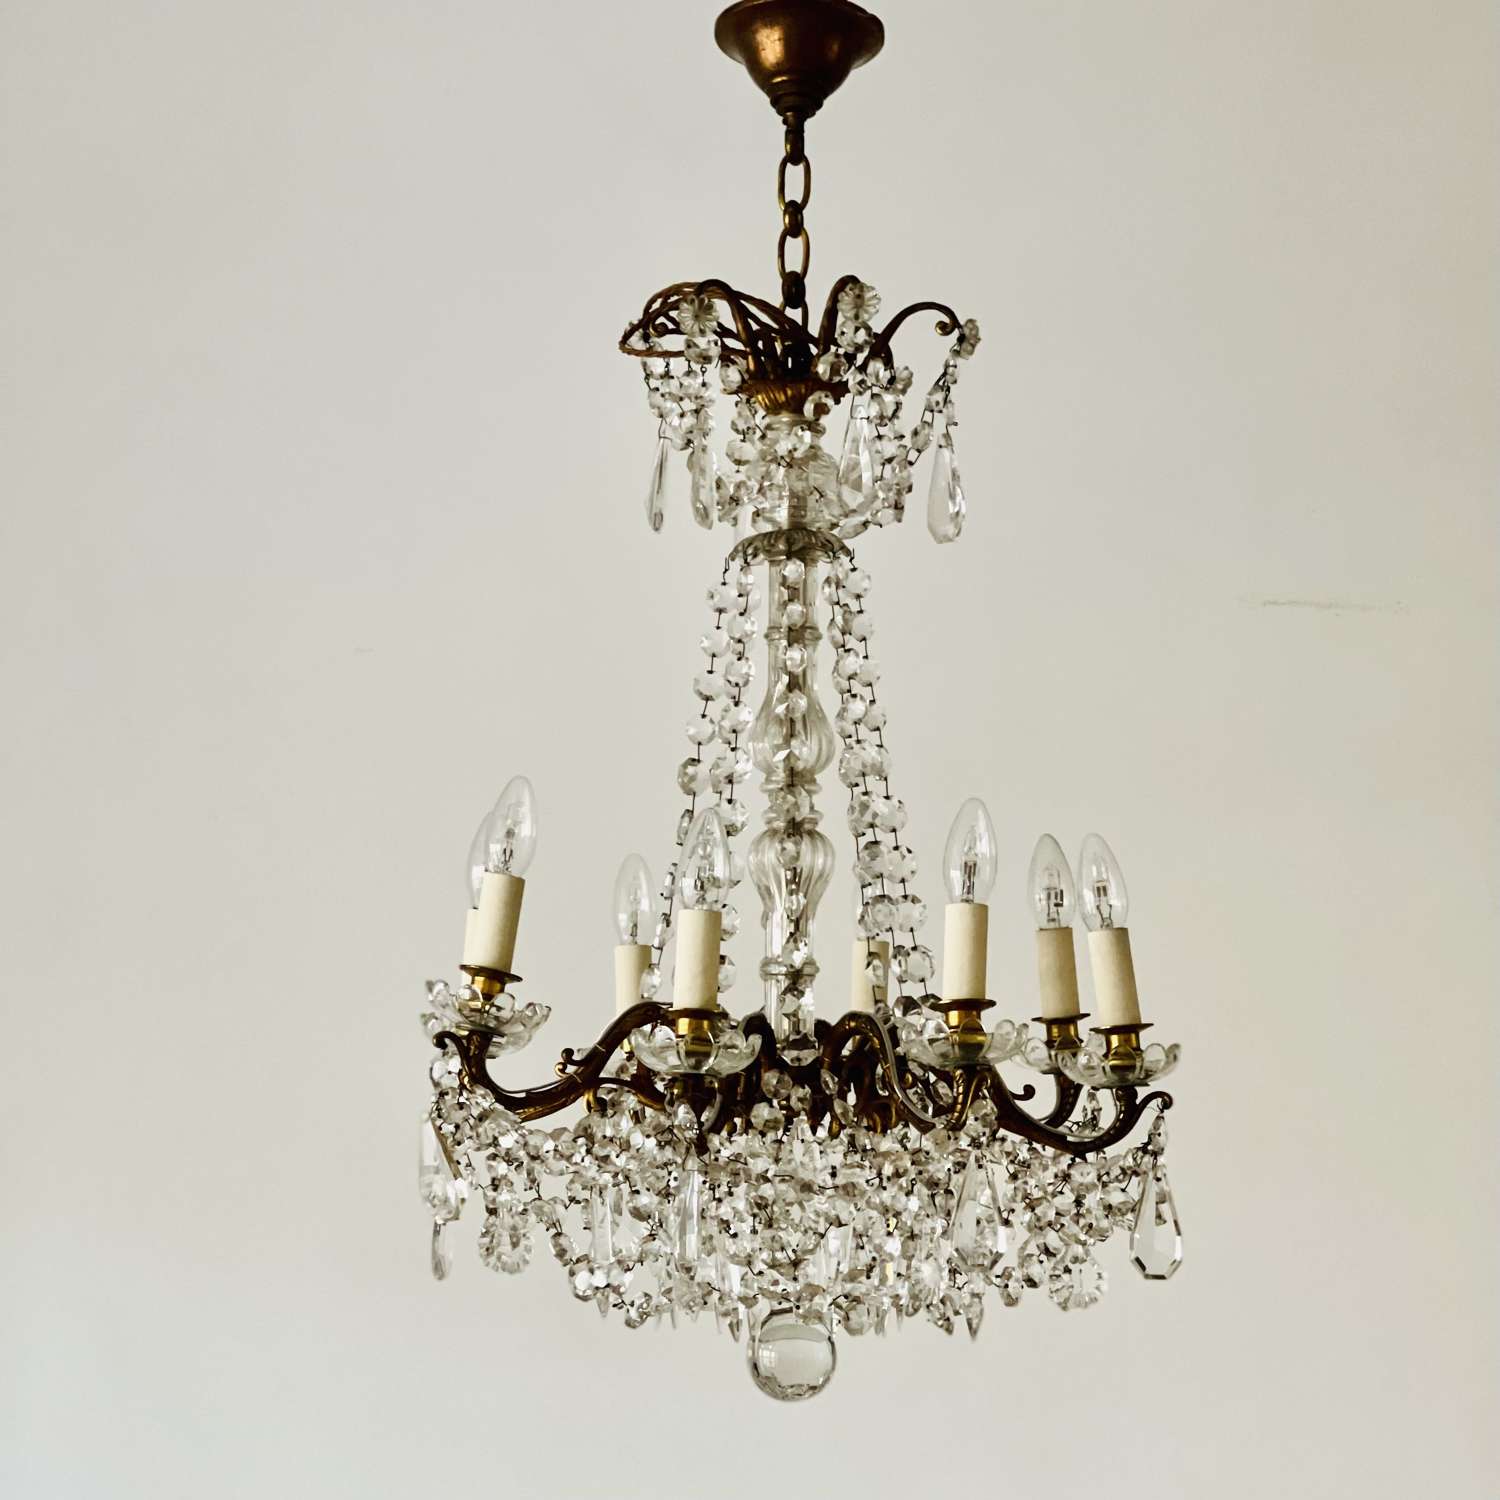 19th century French crystal 8 branch chandelier